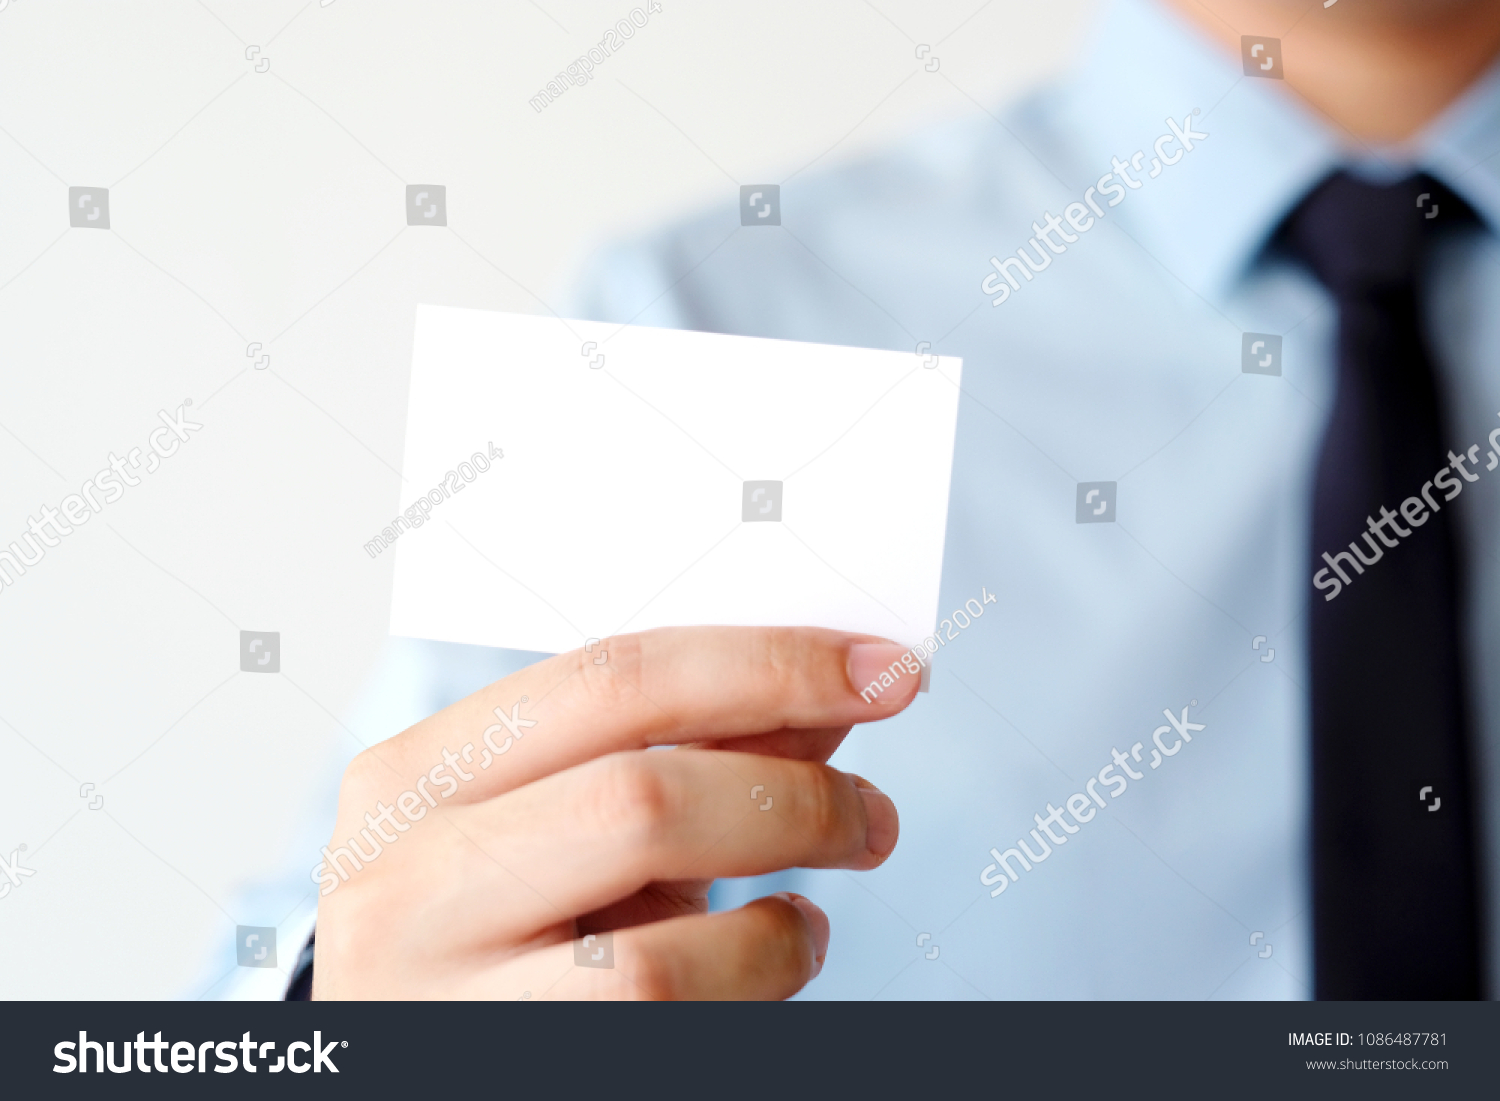 Businessman hand holding blank white business card with copy space for text, business mock up background concept  #1086487781